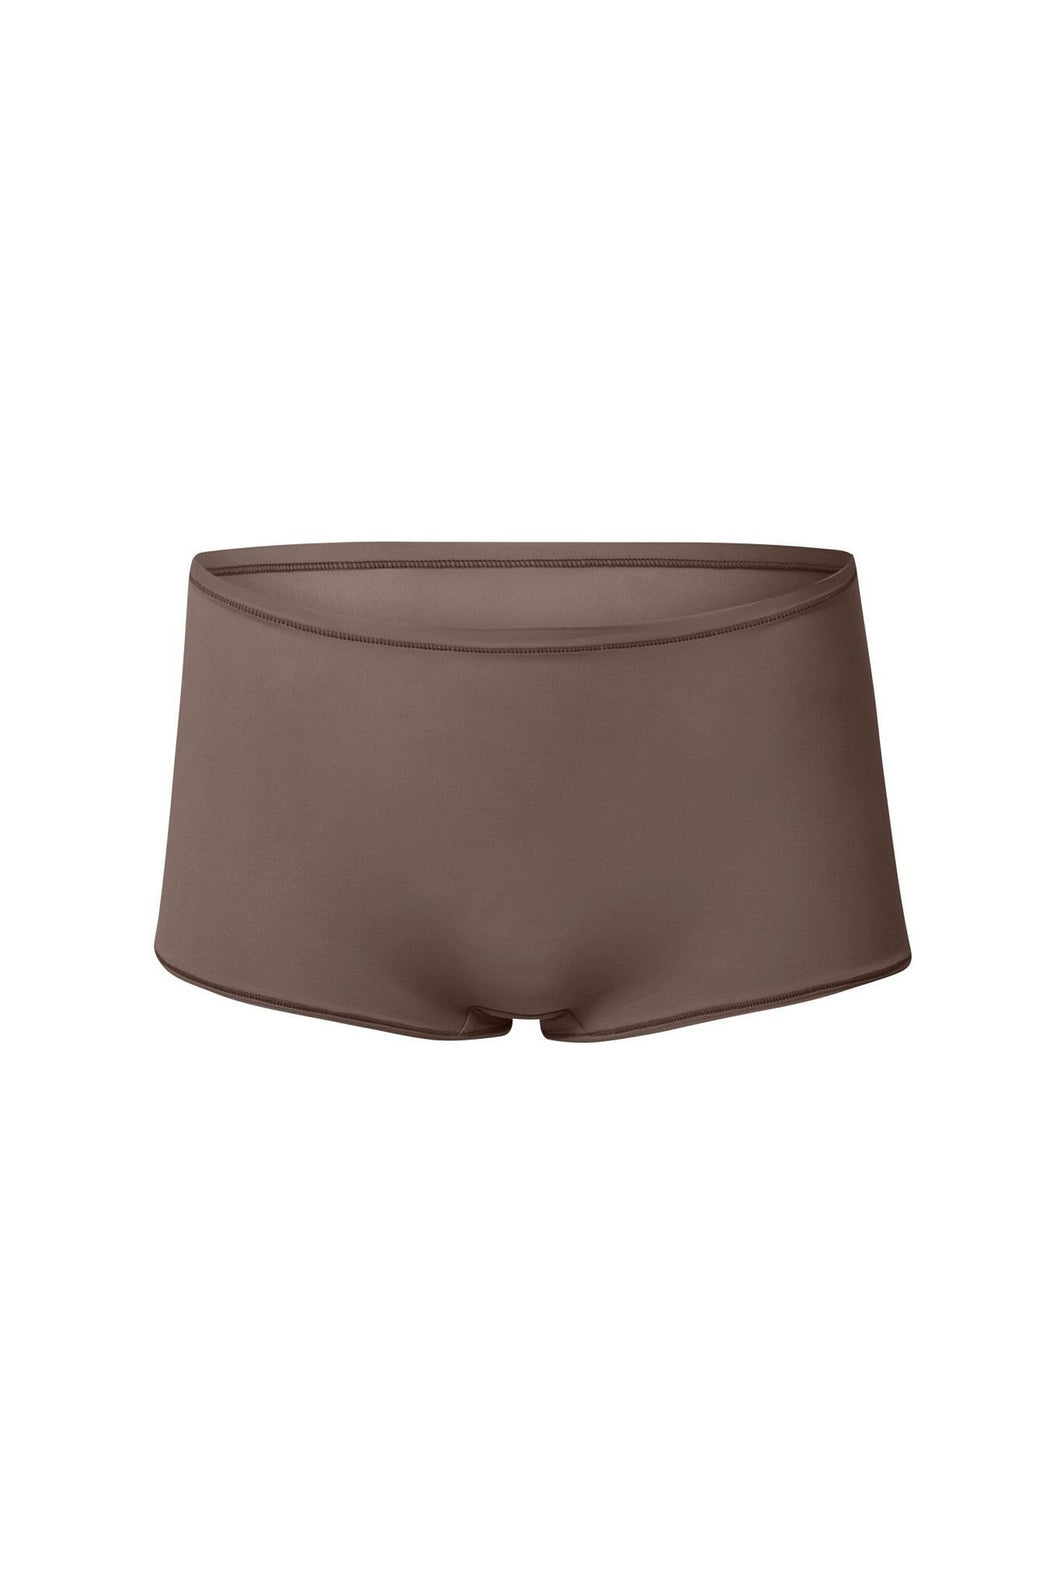 nueskin Risa in color Deep Taupe and shape shortie